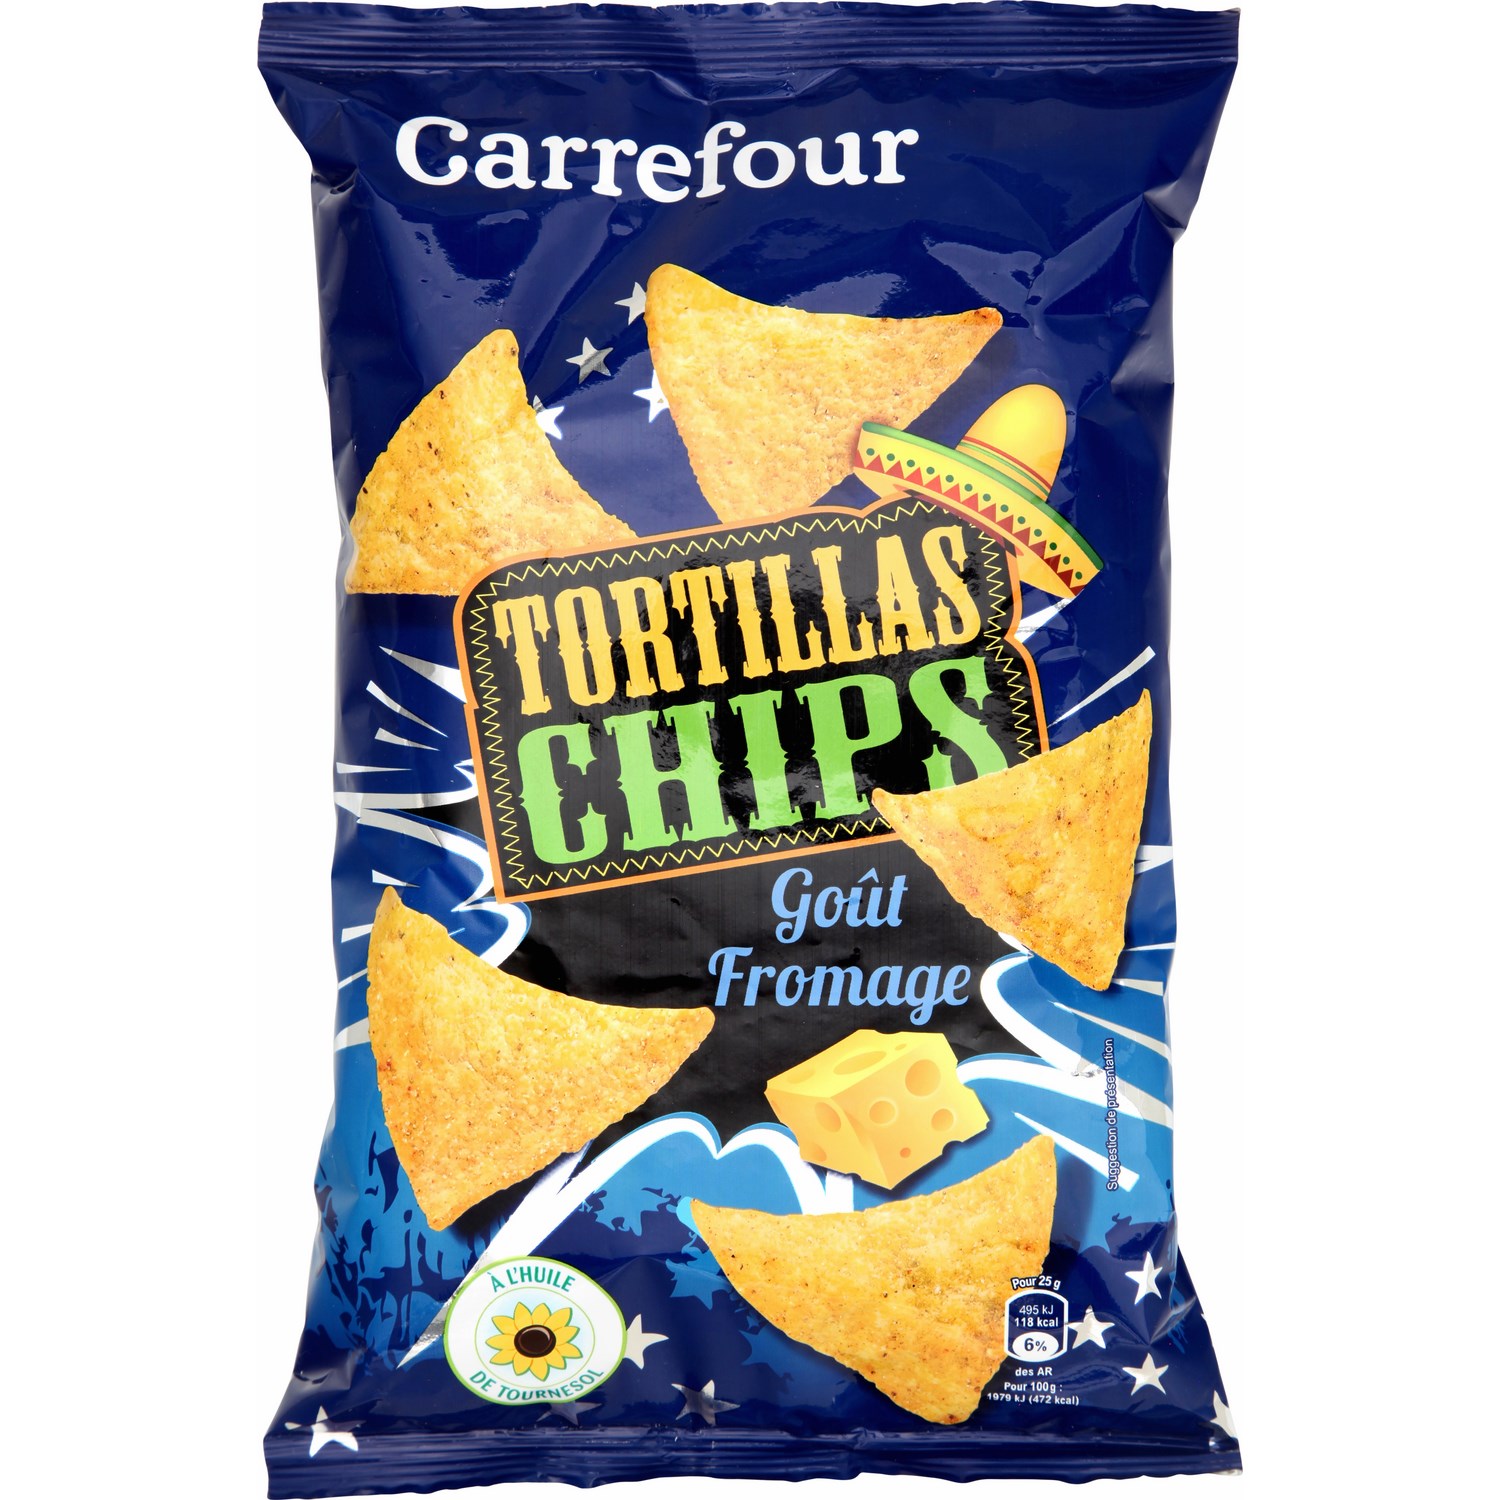 Tortillas chips gout fromage Carrefour